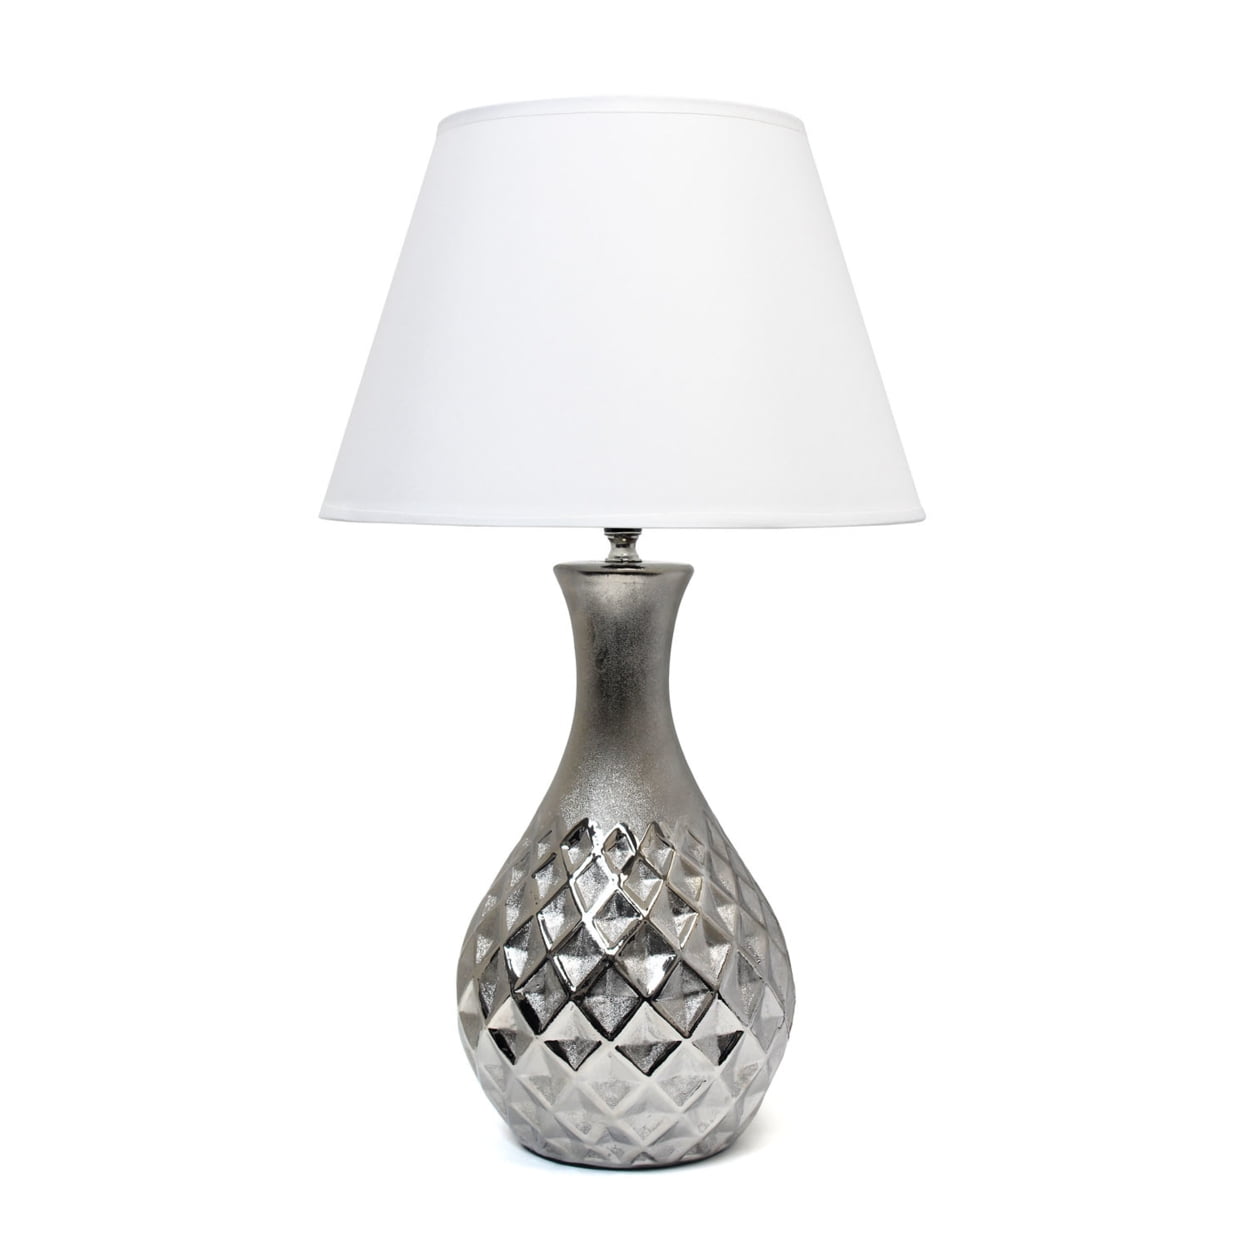 Juliet Ceramic Table Lamp With Metallic Silver Base & White Fabric Shade